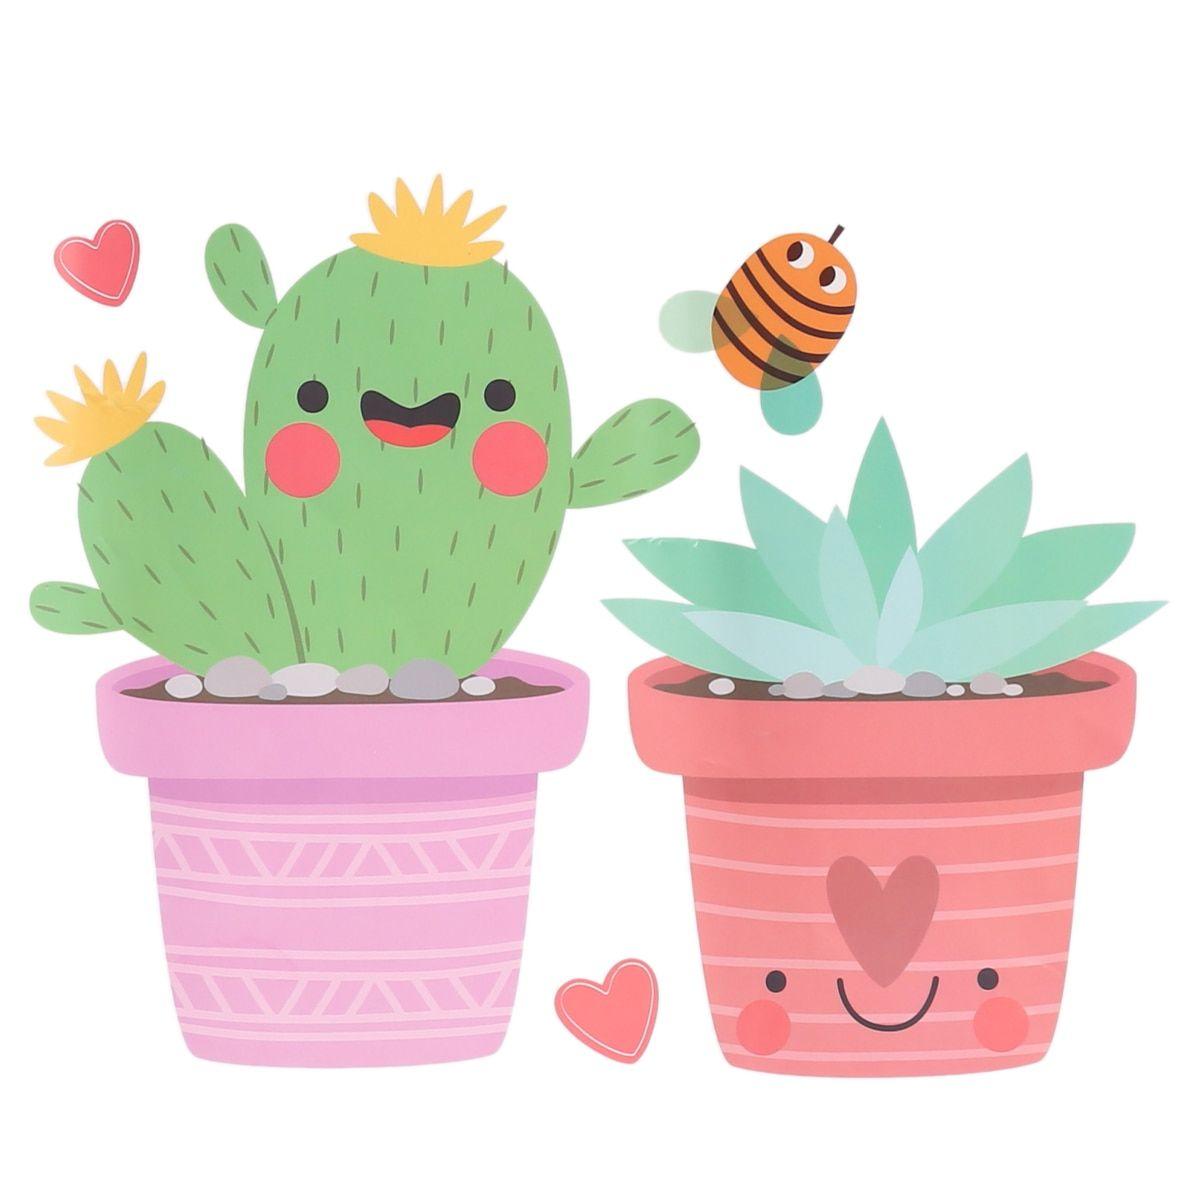 Buy wallpaper cute cactus and get free shipping on AliExpress.com